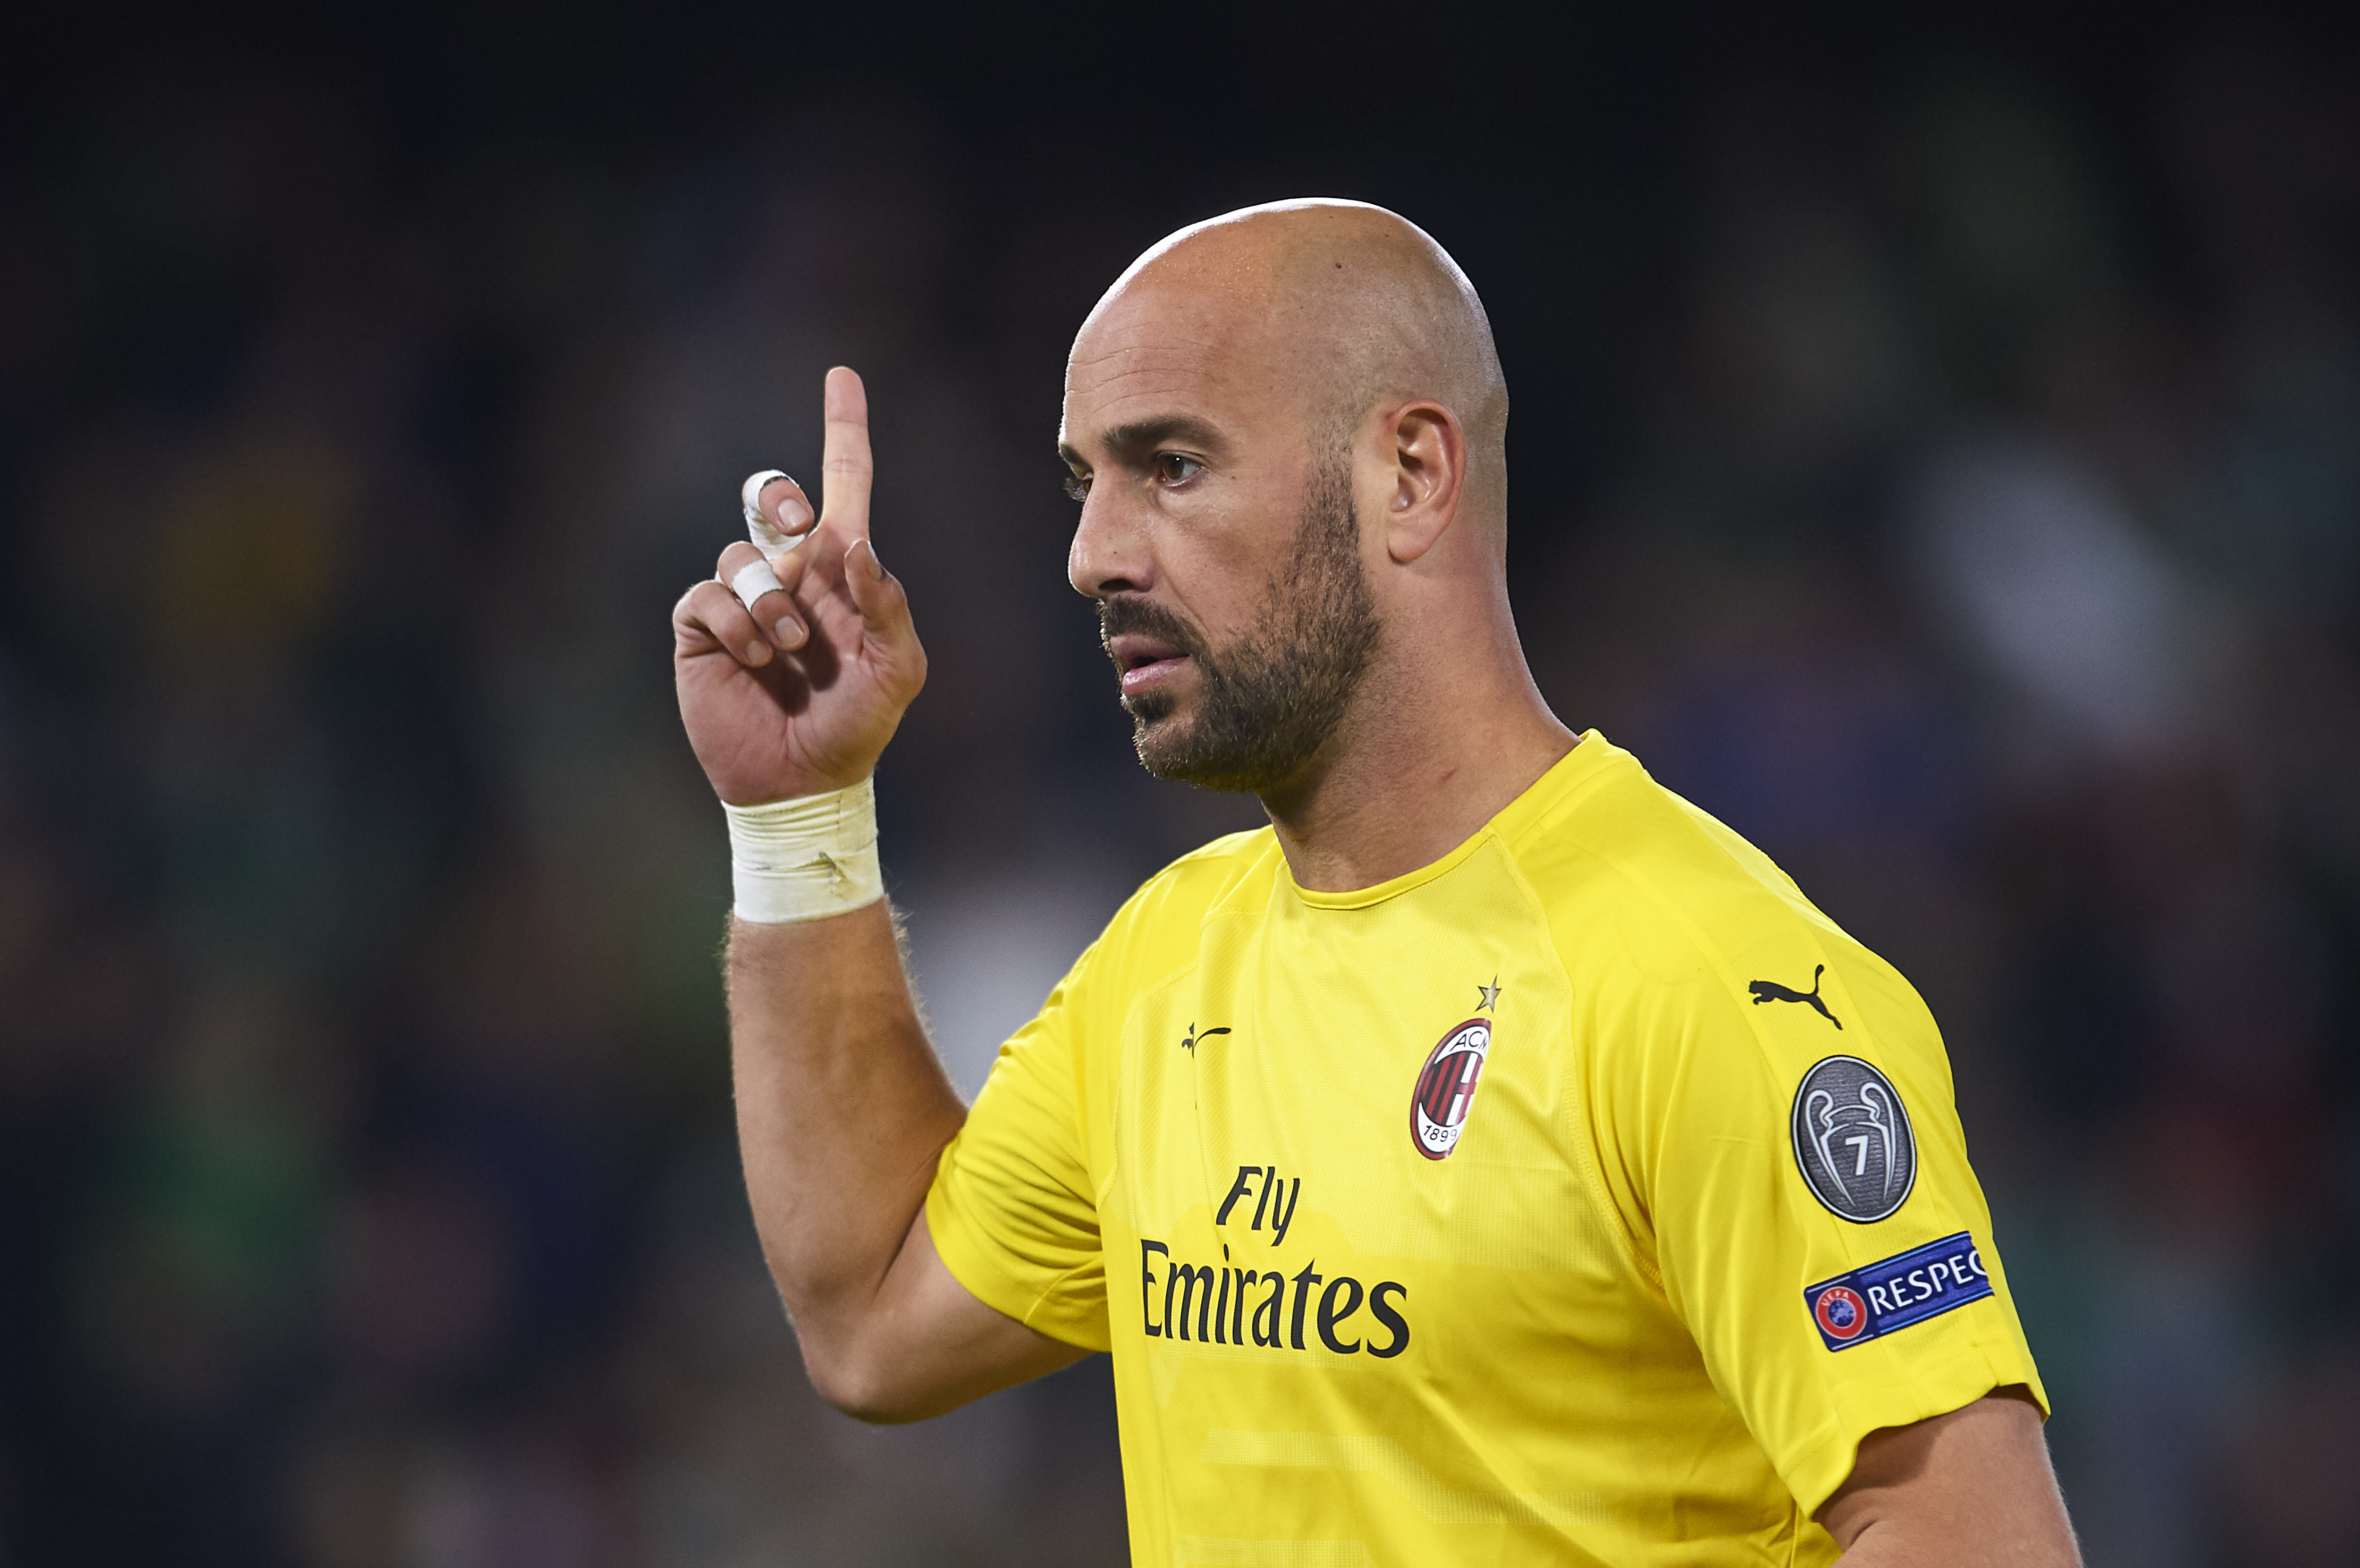 SEVILLE, SPAIN - NOVEMBER 08: Pepe Reina of AC Milan reacts during the UEFA Europa League Group F match between Real Betis and AC Milan at Estadio Benito Villamarin on November 8, 2018 in Seville, Spain. (Photo by Aitor Alcalde/Getty Images)